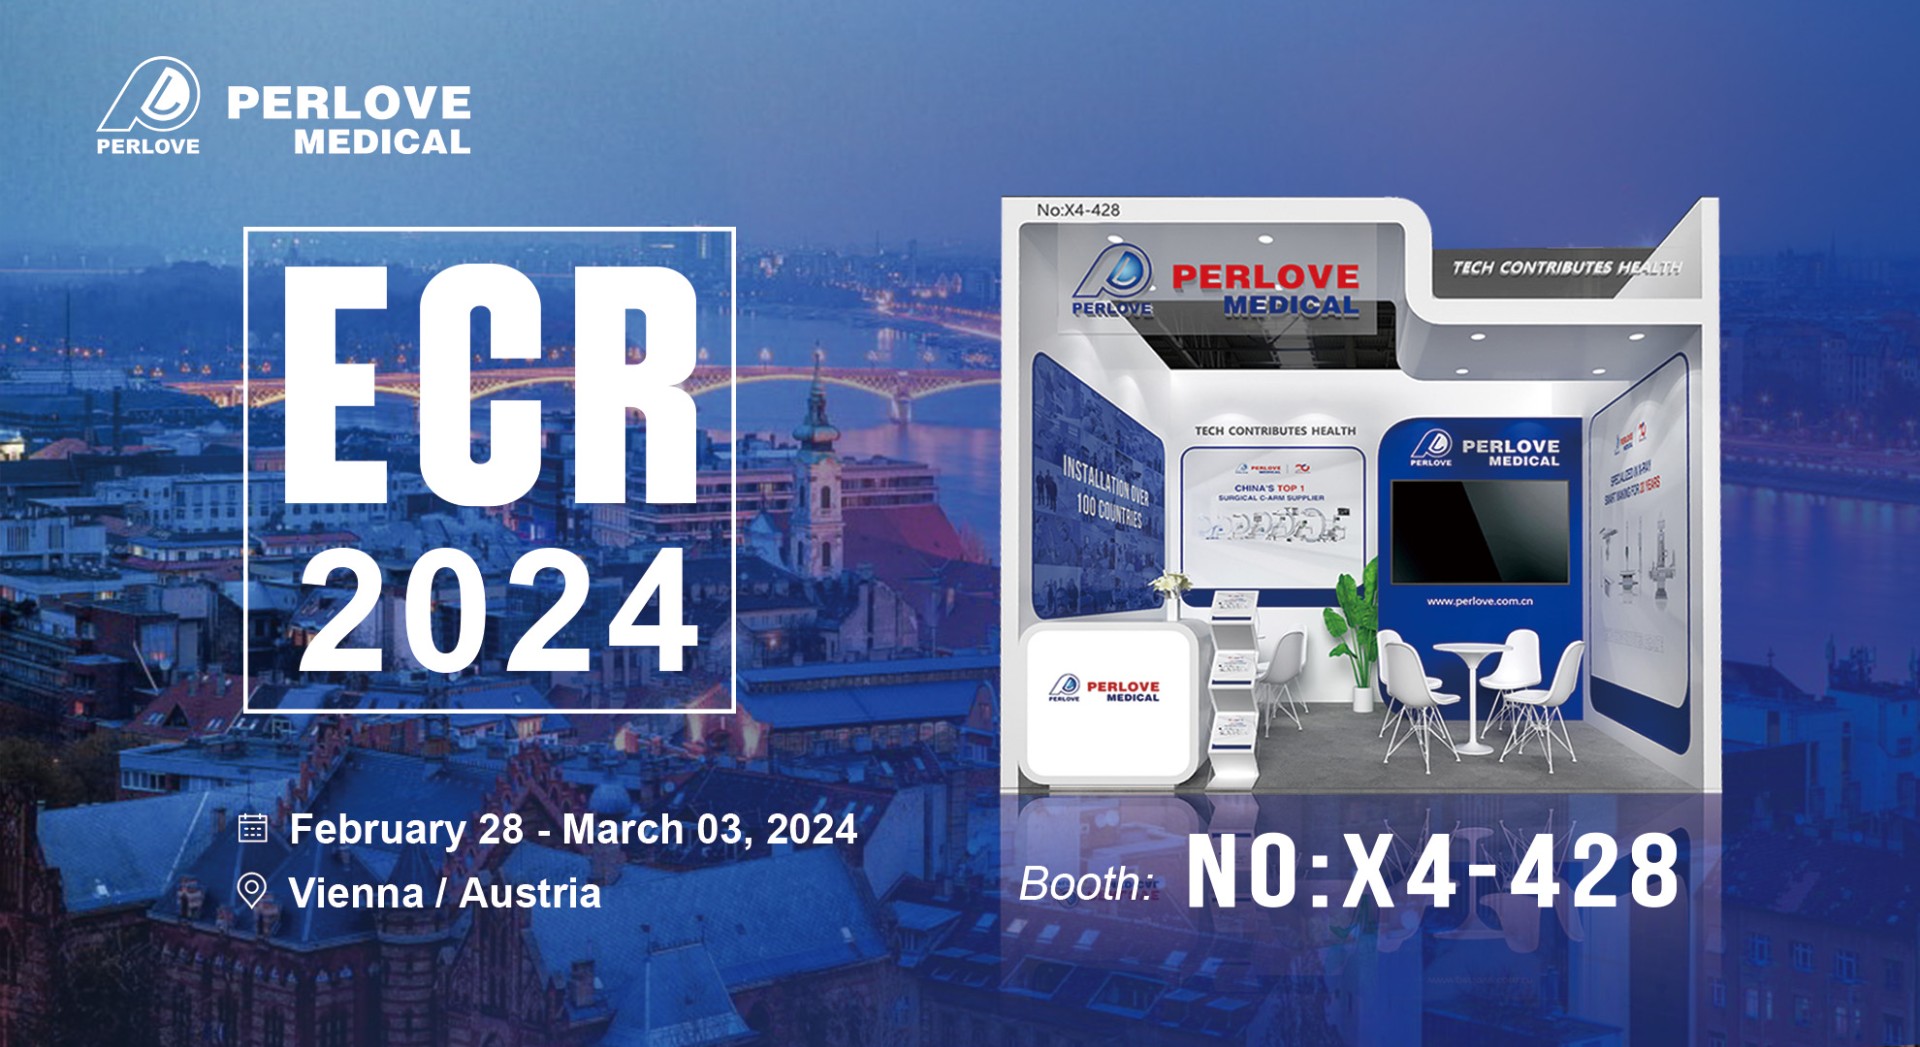  Perlove will Present State-of-the-Art Medical Imaging Solutions at ECR Exhibition 